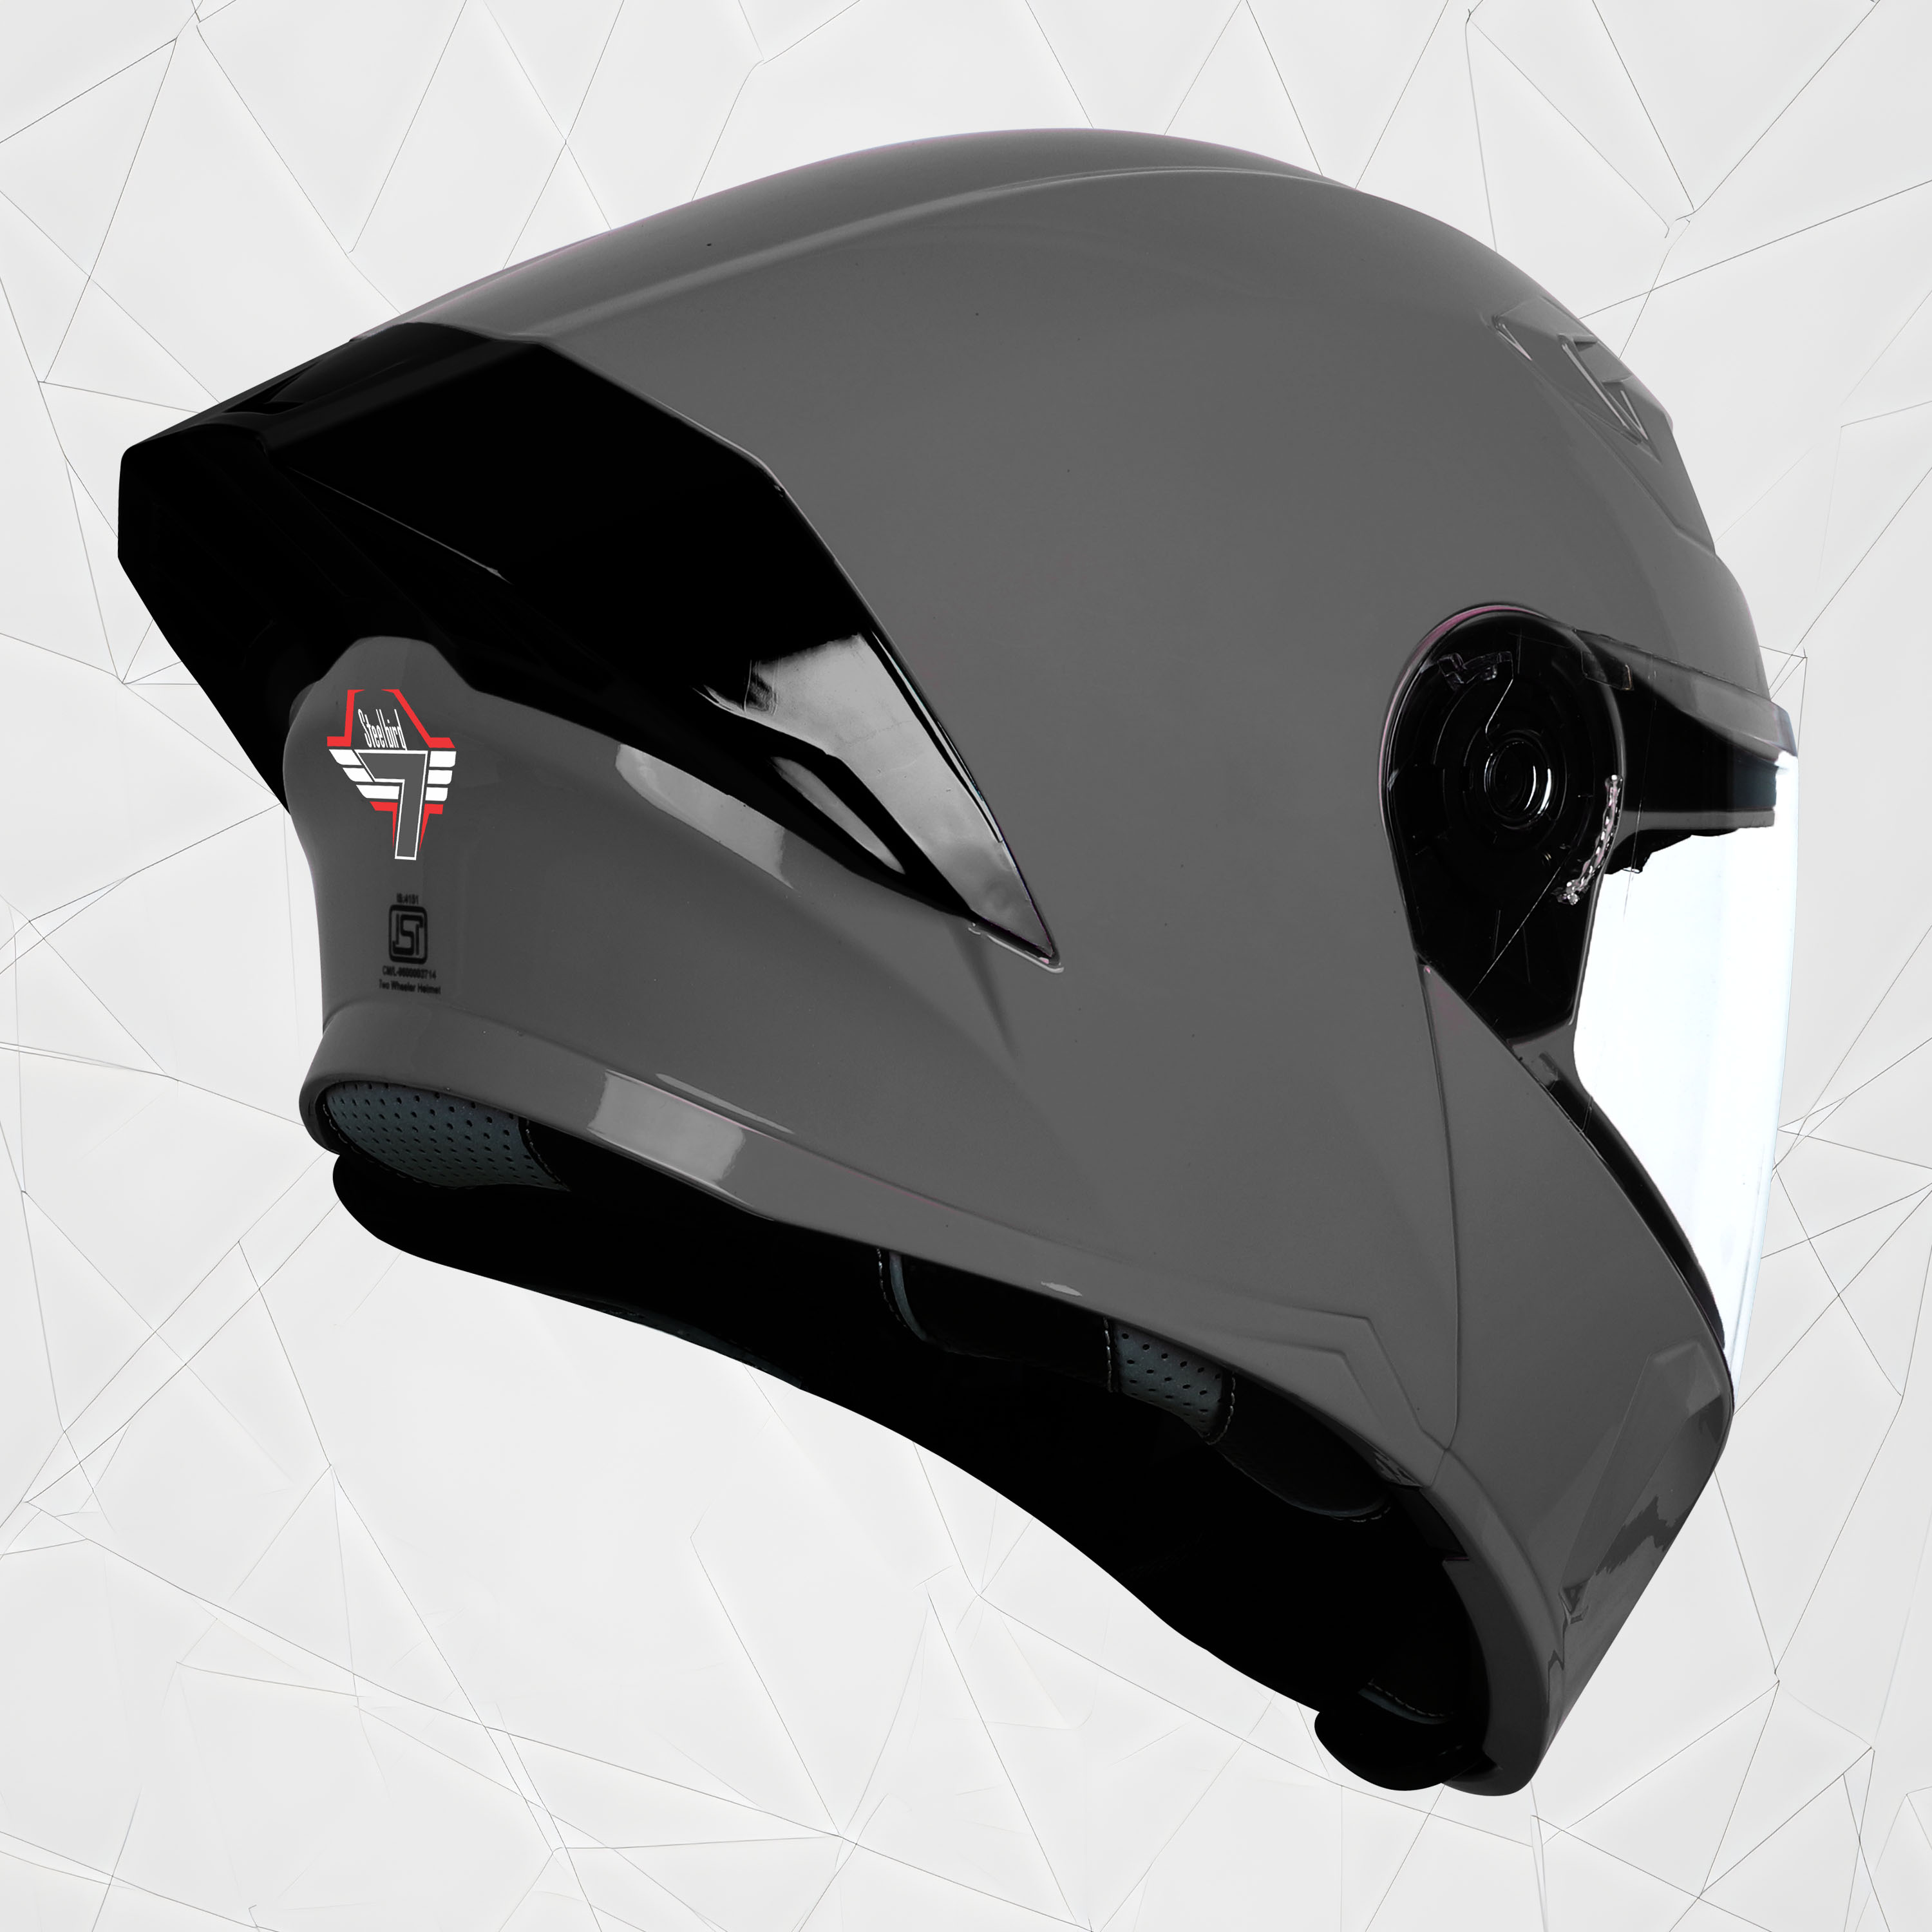 Steelbird SBA-20 7Wings ISI Certified Flip-Up Helmet With Black Spoiler For Men And Women (Glossy H. Grey With Clear Visor)